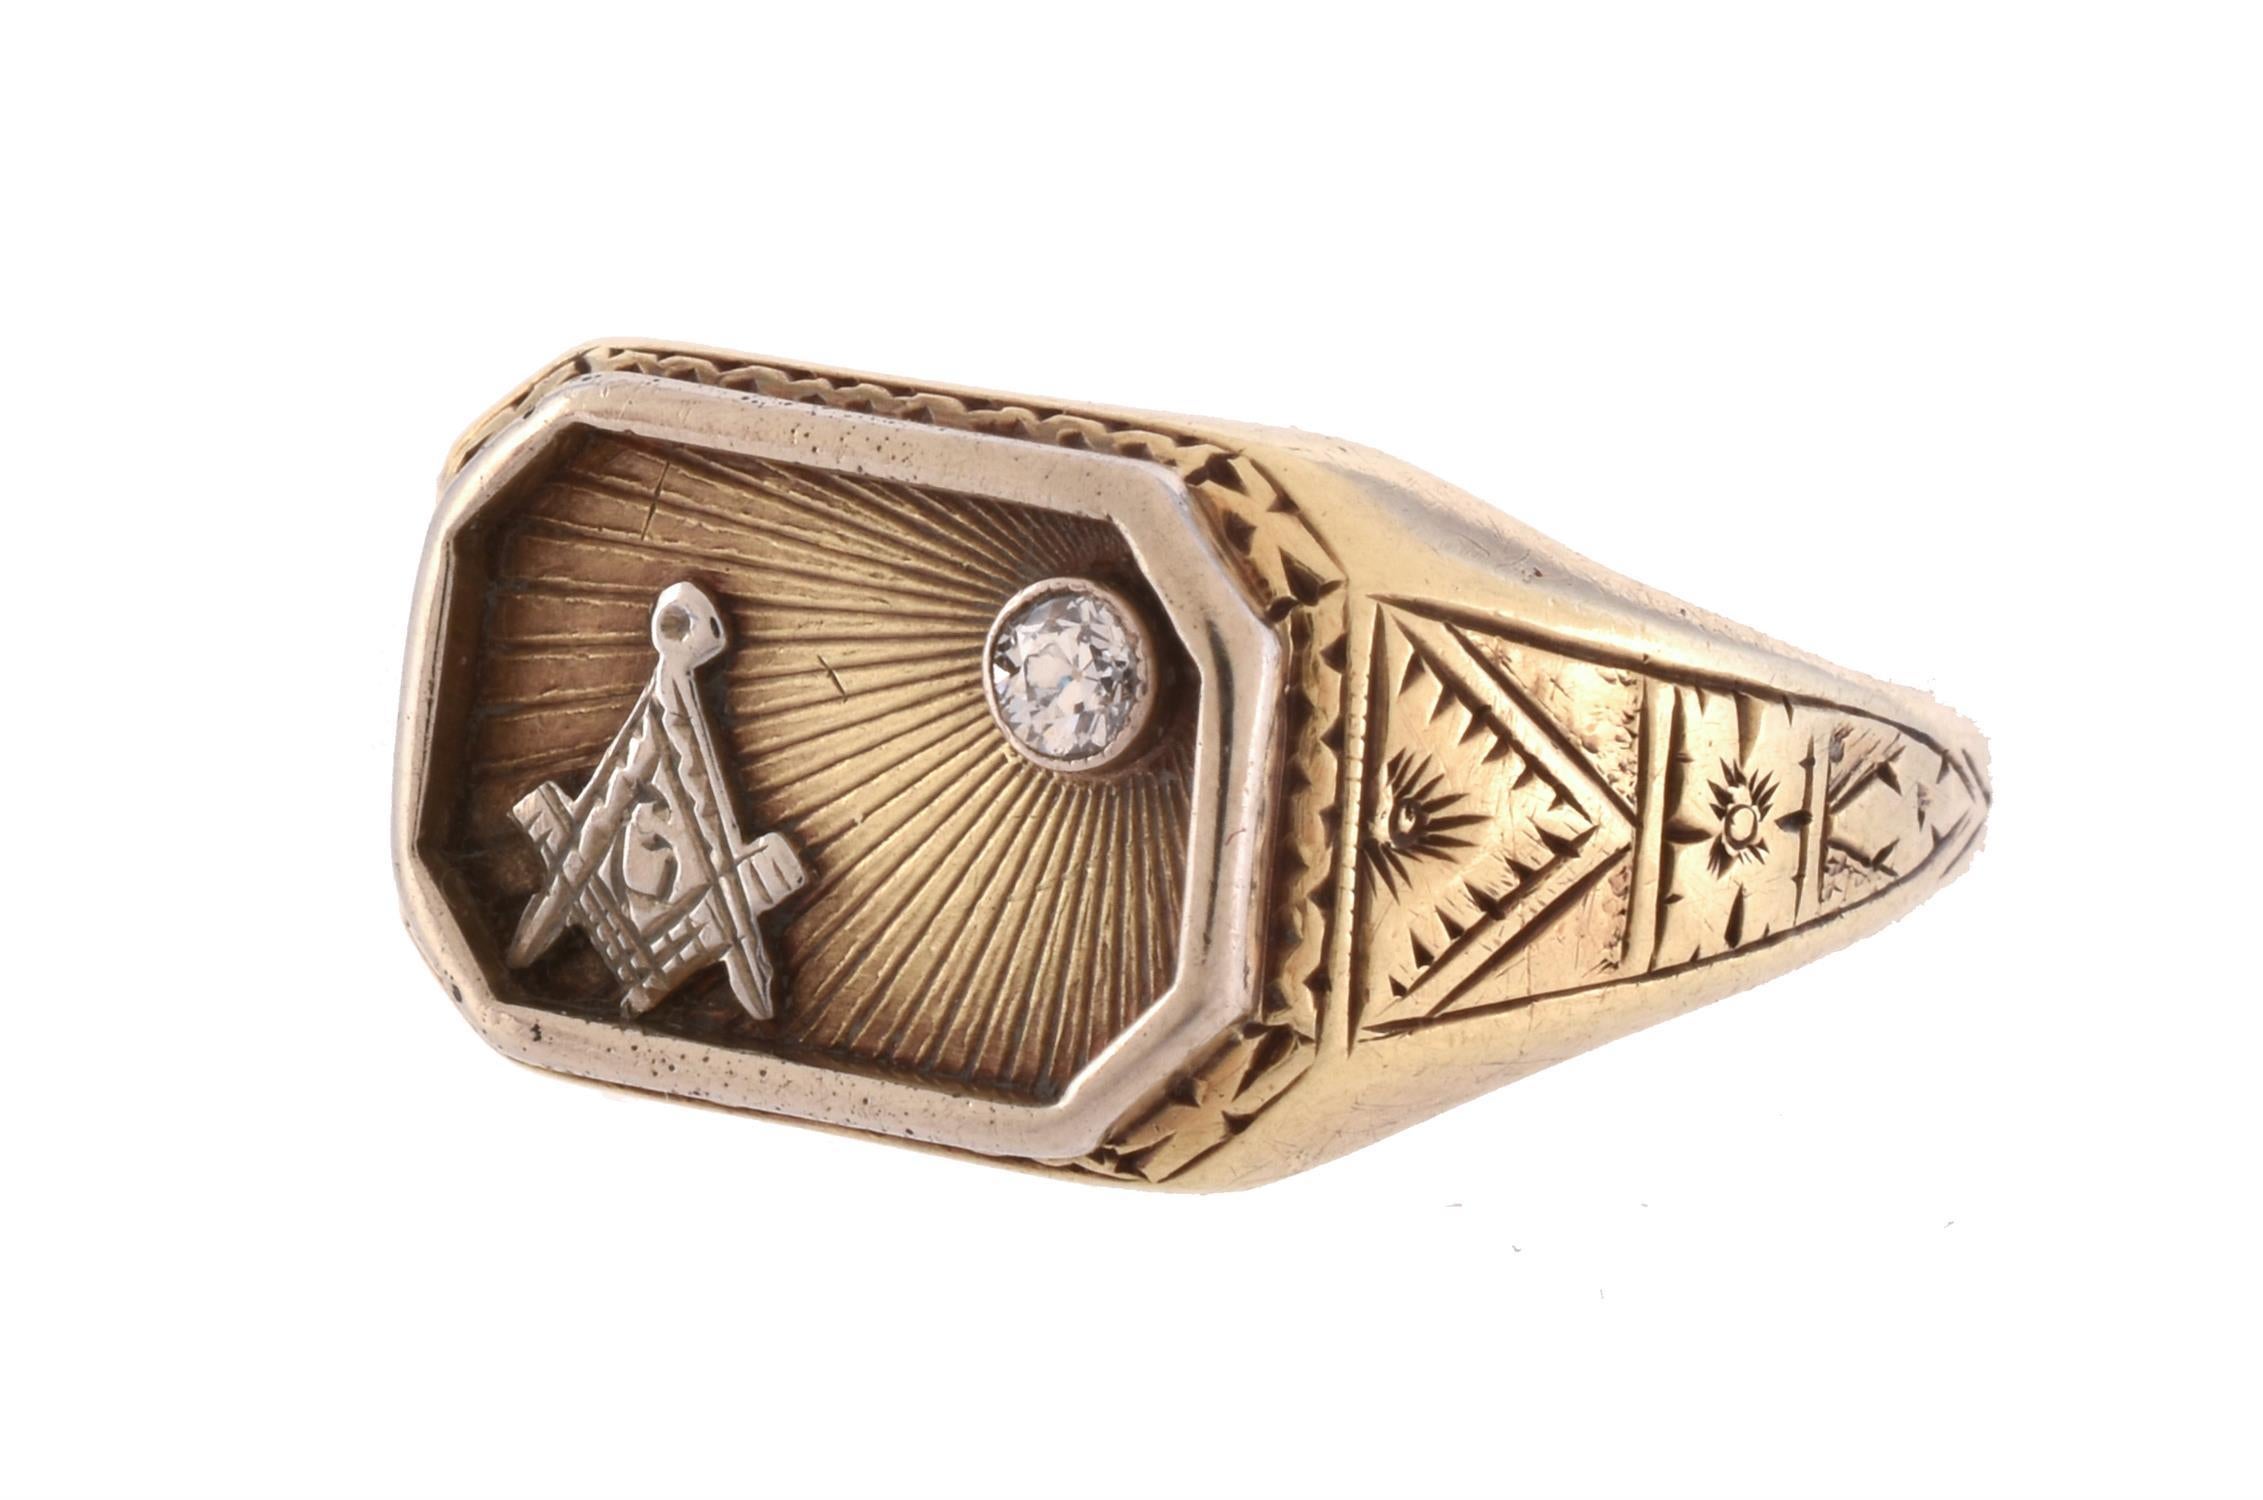 The octagonal panel set with an old brilliant cut diamond upon a radiating ground, with applied masonic monogram, to foliate engraved shoulders, stamped 14k, finger size 9 1/2
Weight: 5.9gr